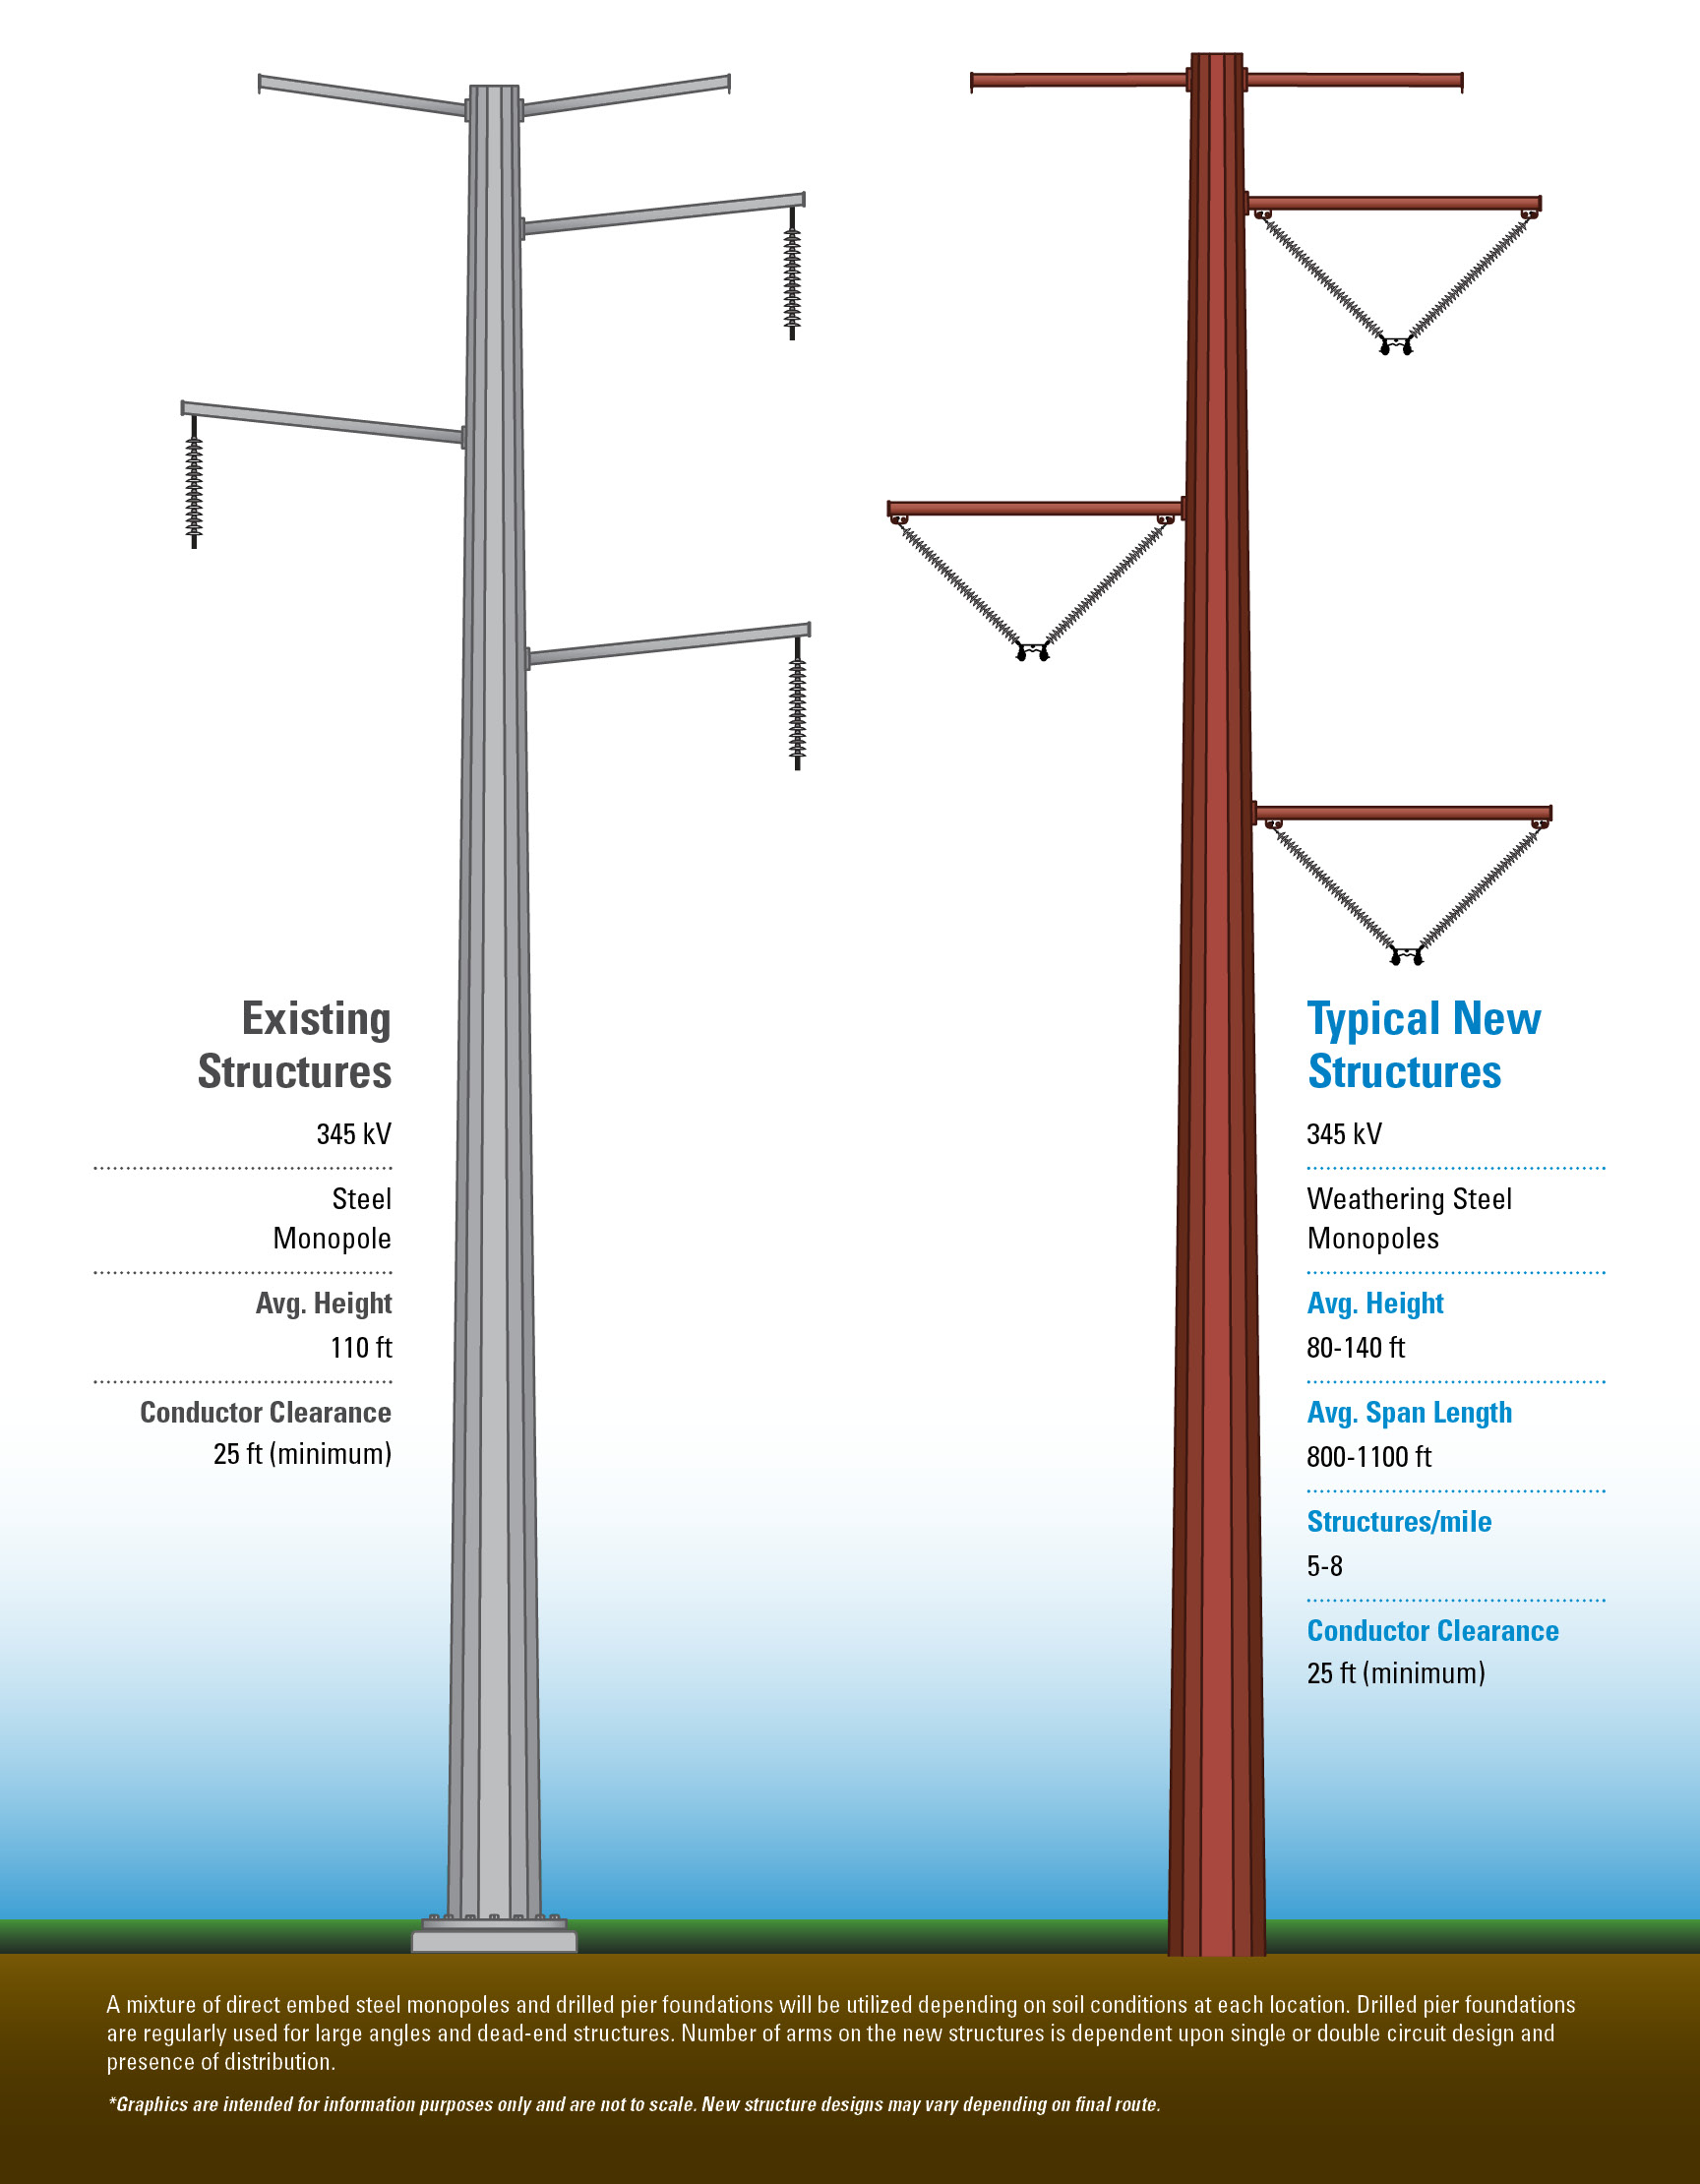 Two side by side structure graphics showing the existing structures and anticipated new structures for the county. Graphics are intended for information purposes only and are not to scale. New structure designs, including number of arms and type of foundation may vary depending on final route, soil conditions, circuit design, and presence of distribution.
                                                  Graphic 1 shows the existing 138 kV steel monopole, with an average height of 110ft with a conductor clearance of 21ft minimum. 
               
                                                  Graphic 3 shows the anticipated new structure as a 138/345 kV weathering steel monopole with an average height of 80-140ft and average span length between 800-1100 ft. Structures per mile averages between 5-8 miles with a conductor clearance of 25ft minimum.